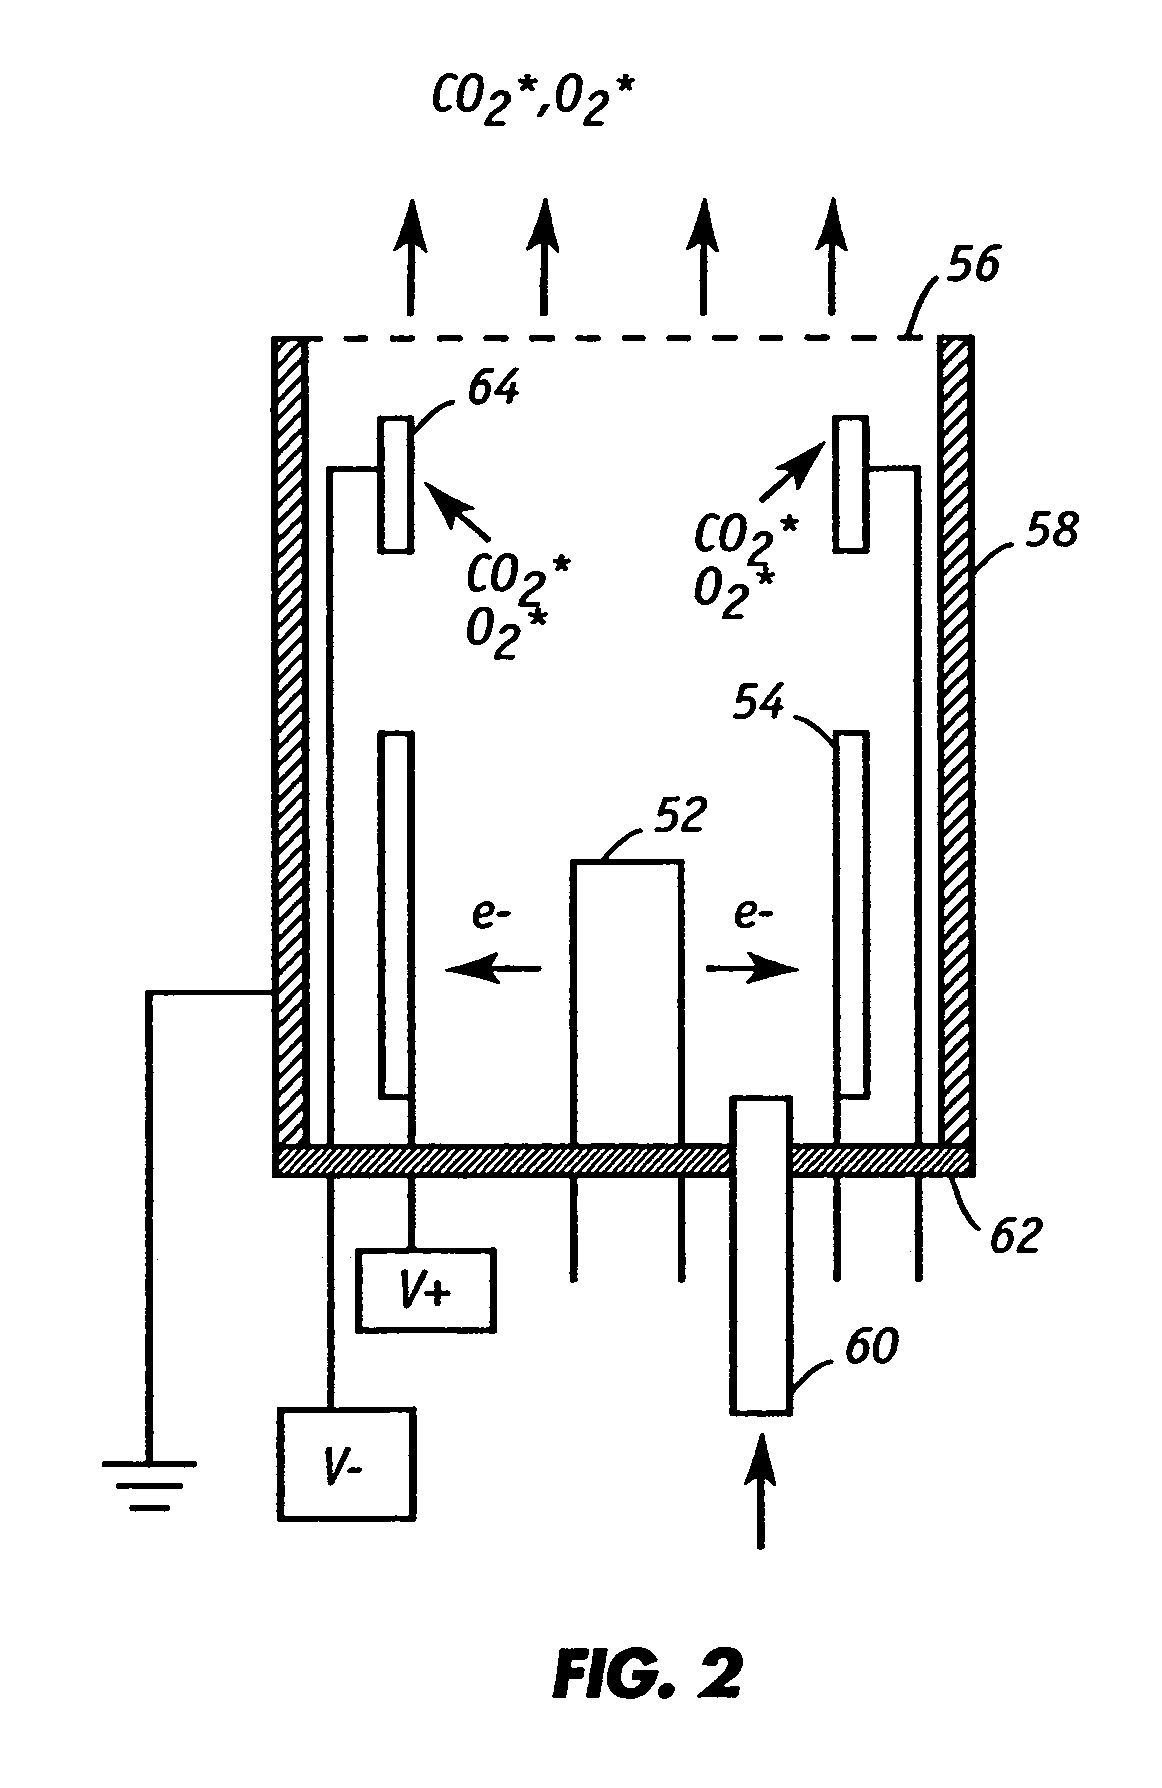 Method for in-situ cleaning of carbon contaminated surfaces